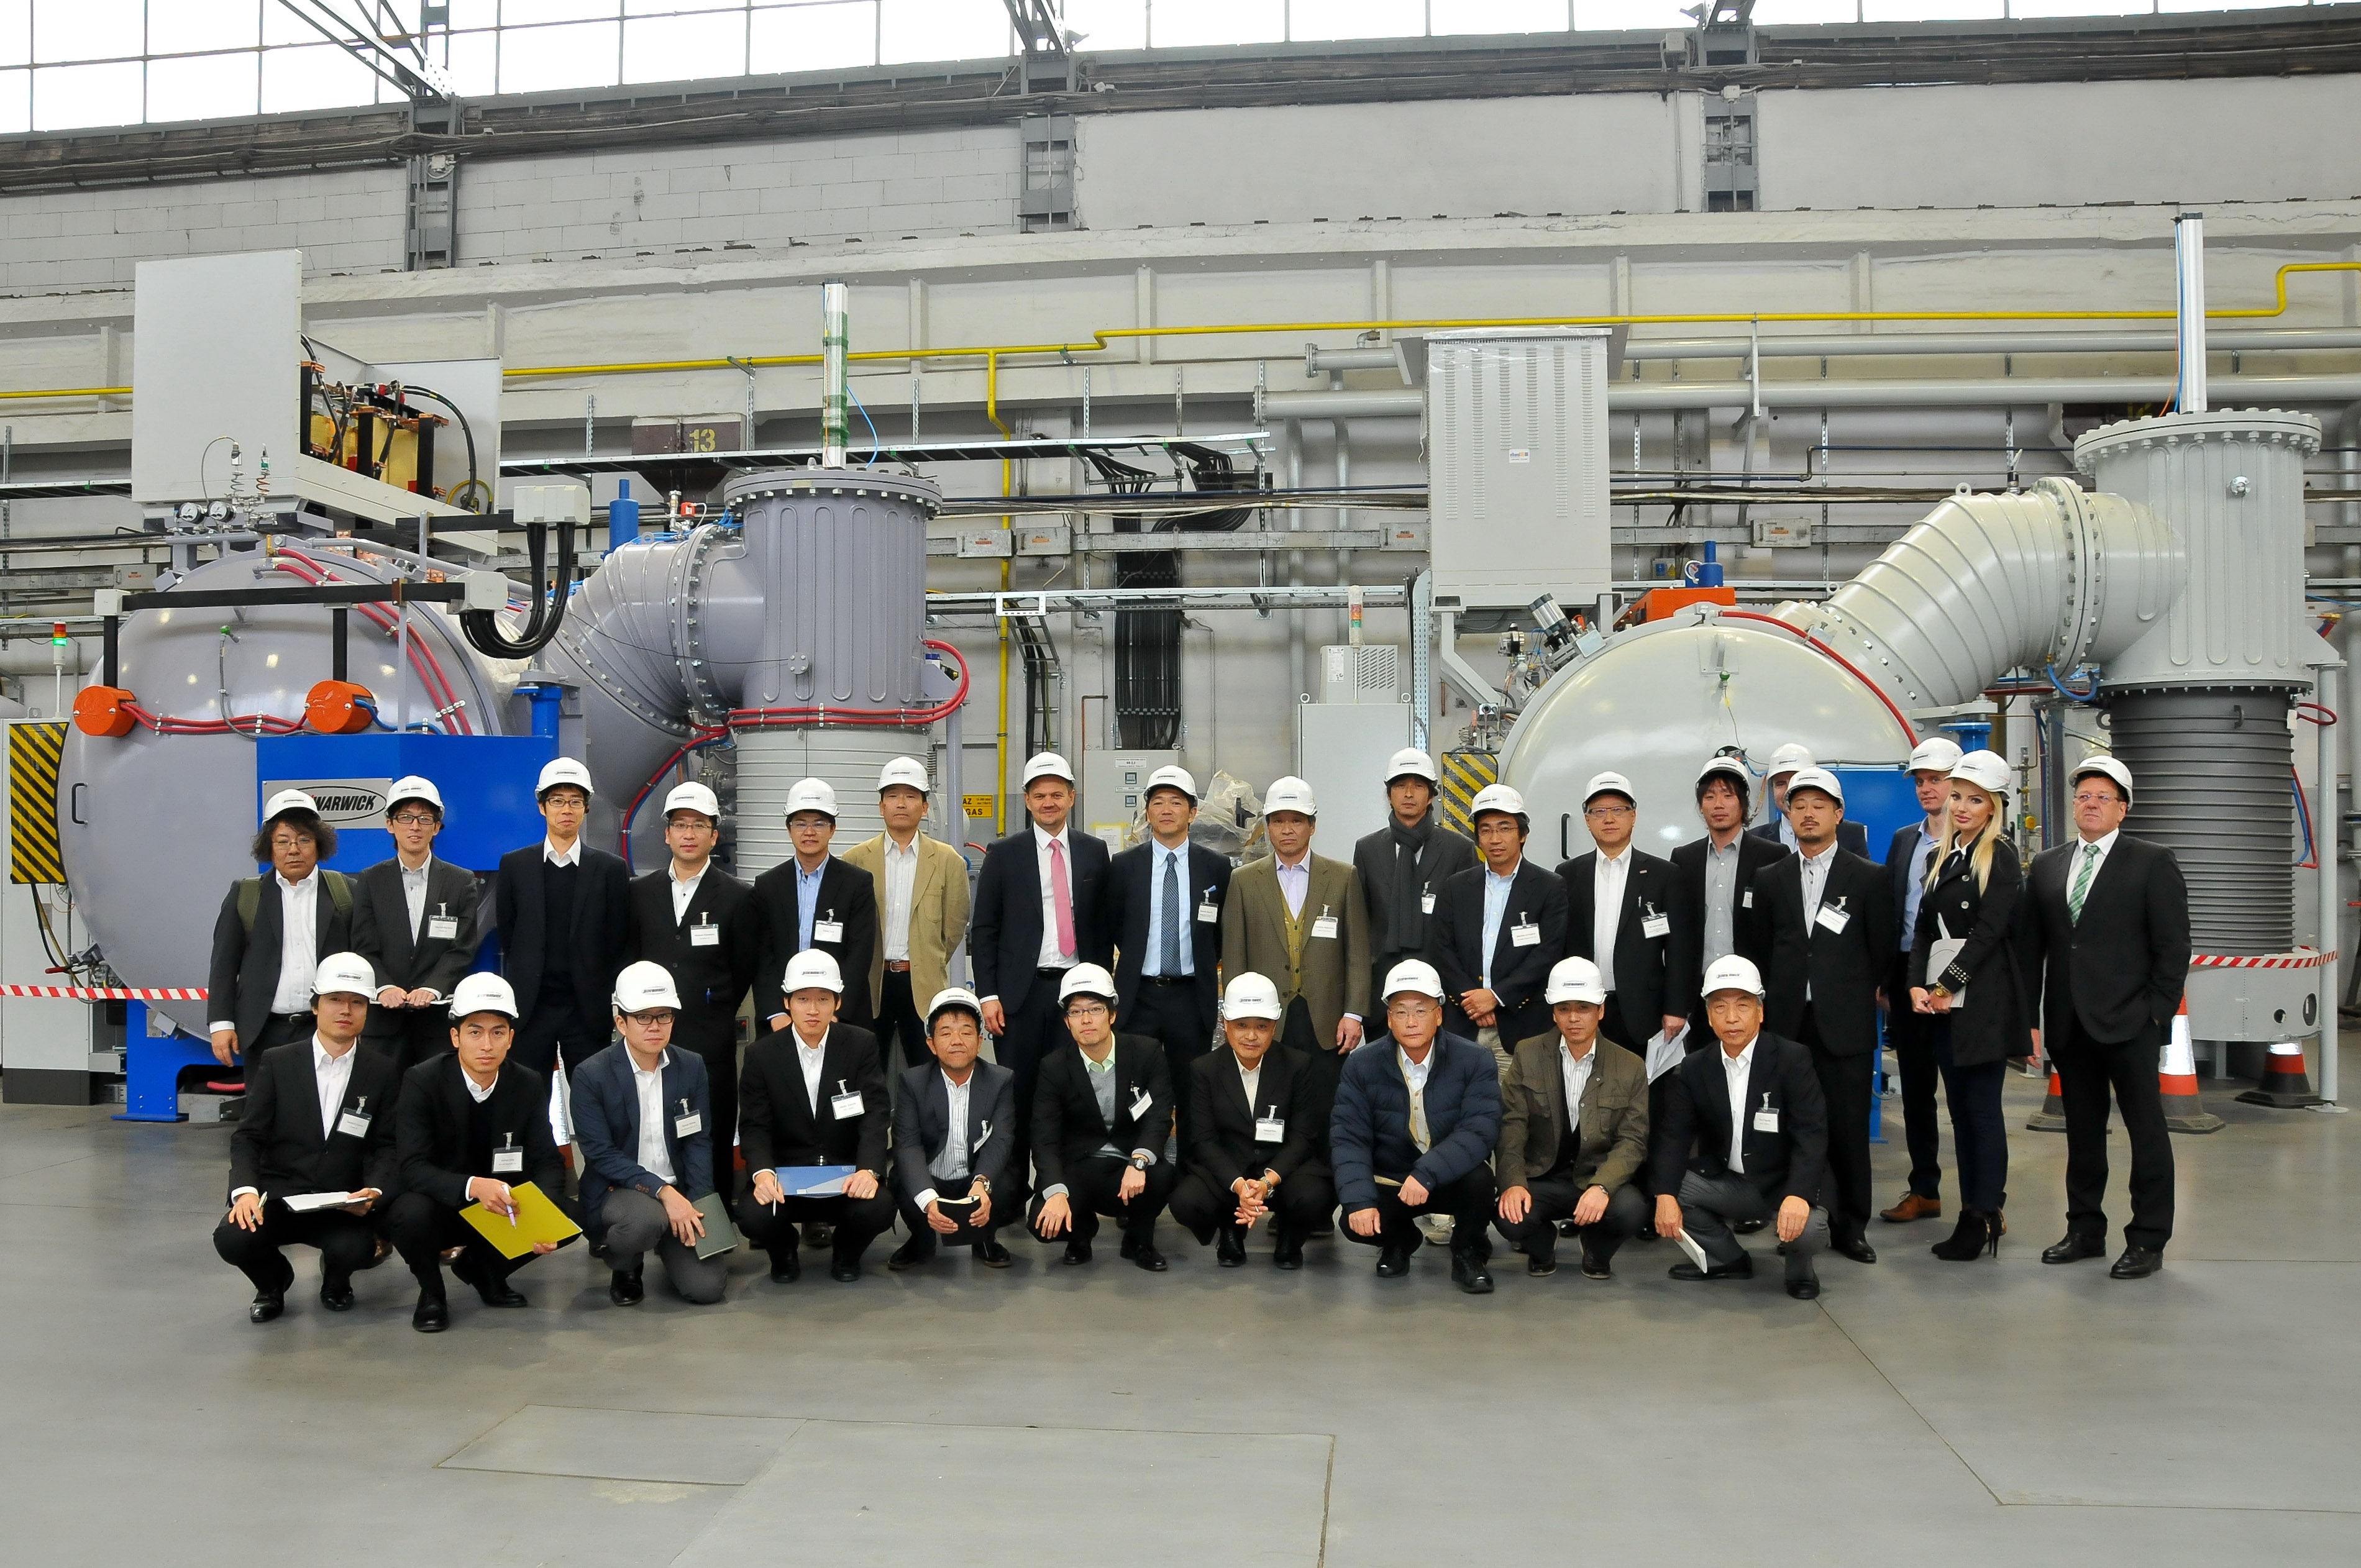 The Japan Society for Heat Treatment (JSHT) visited SECO/WARWICK today